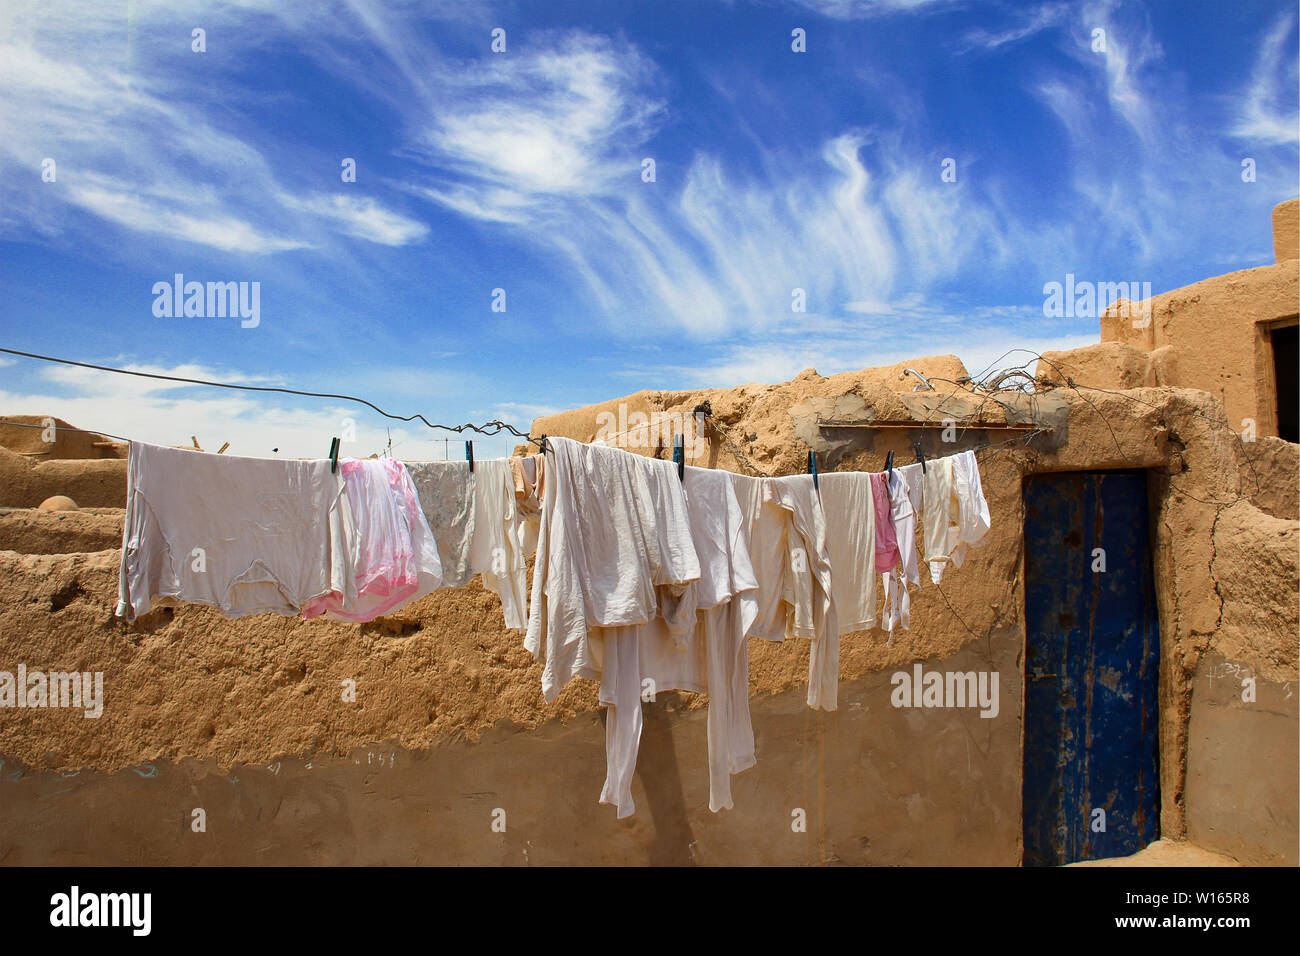 Clotheslines with white laundry on a brown loam house, under the blue sky of Marakech, Morocco. Stock Photo